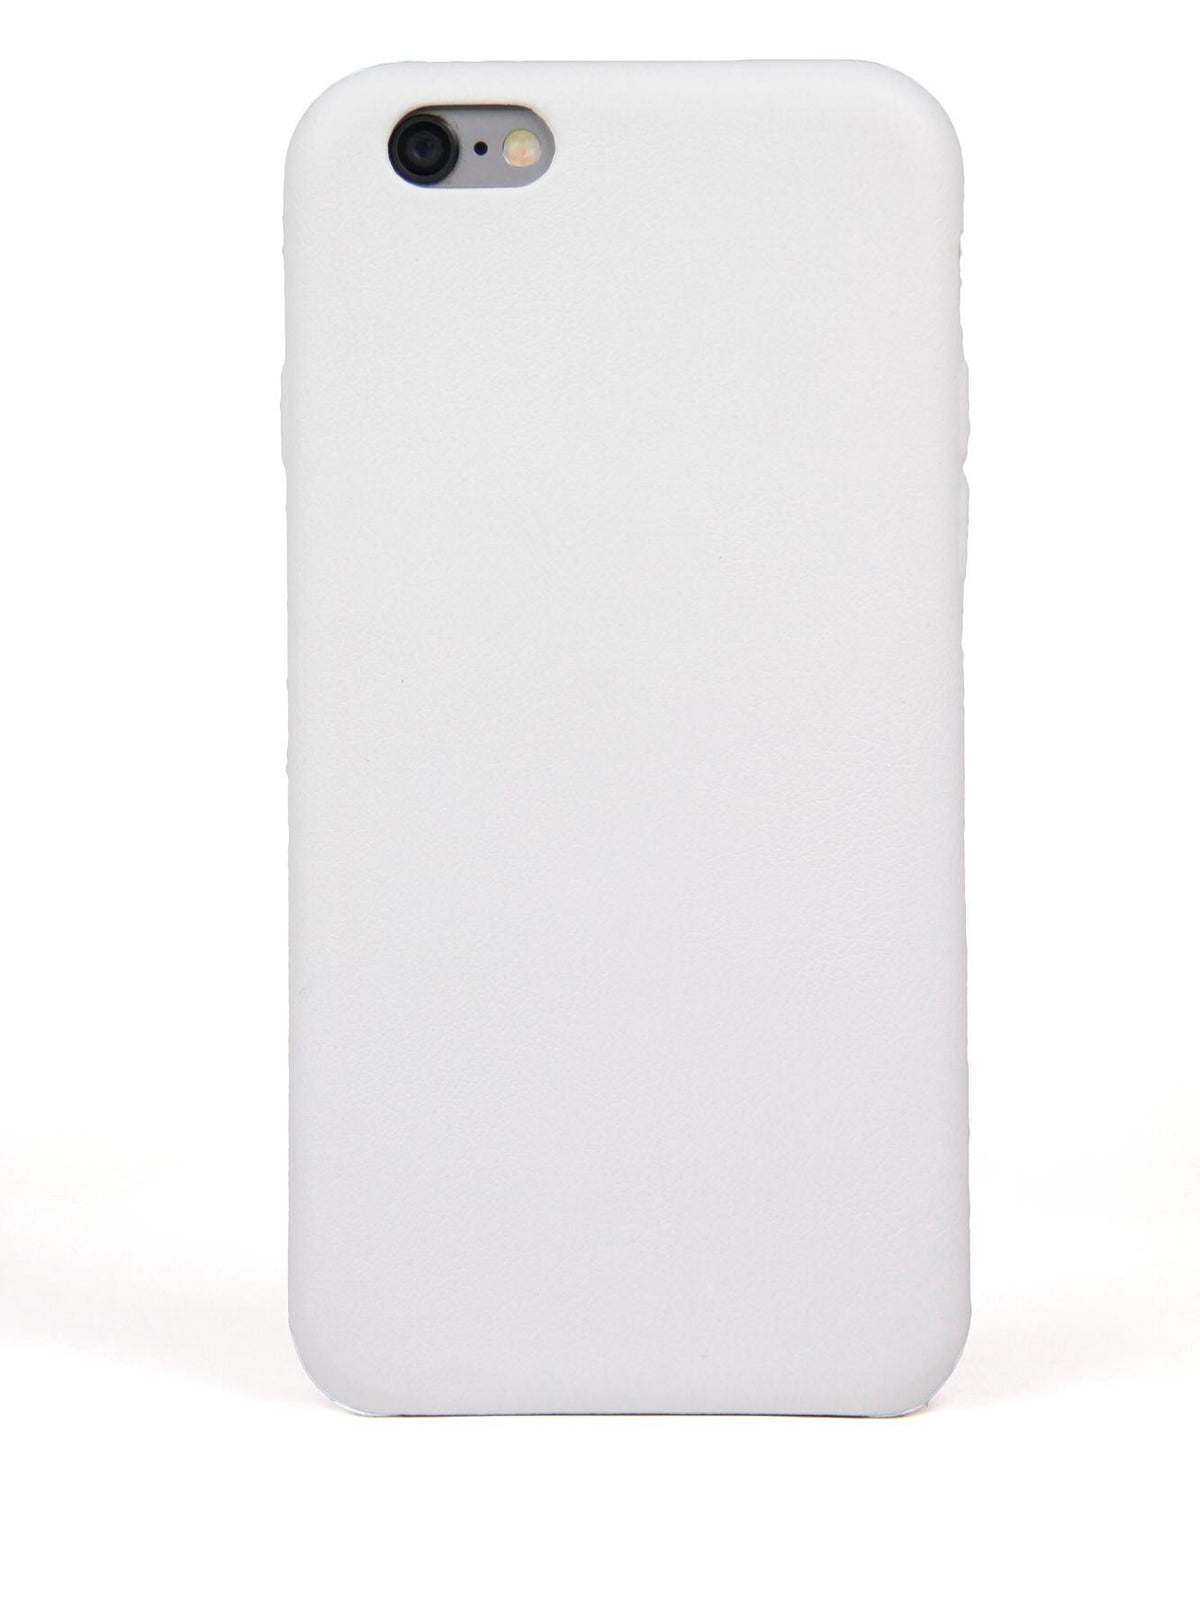 iPhone 6 Case, White Leather